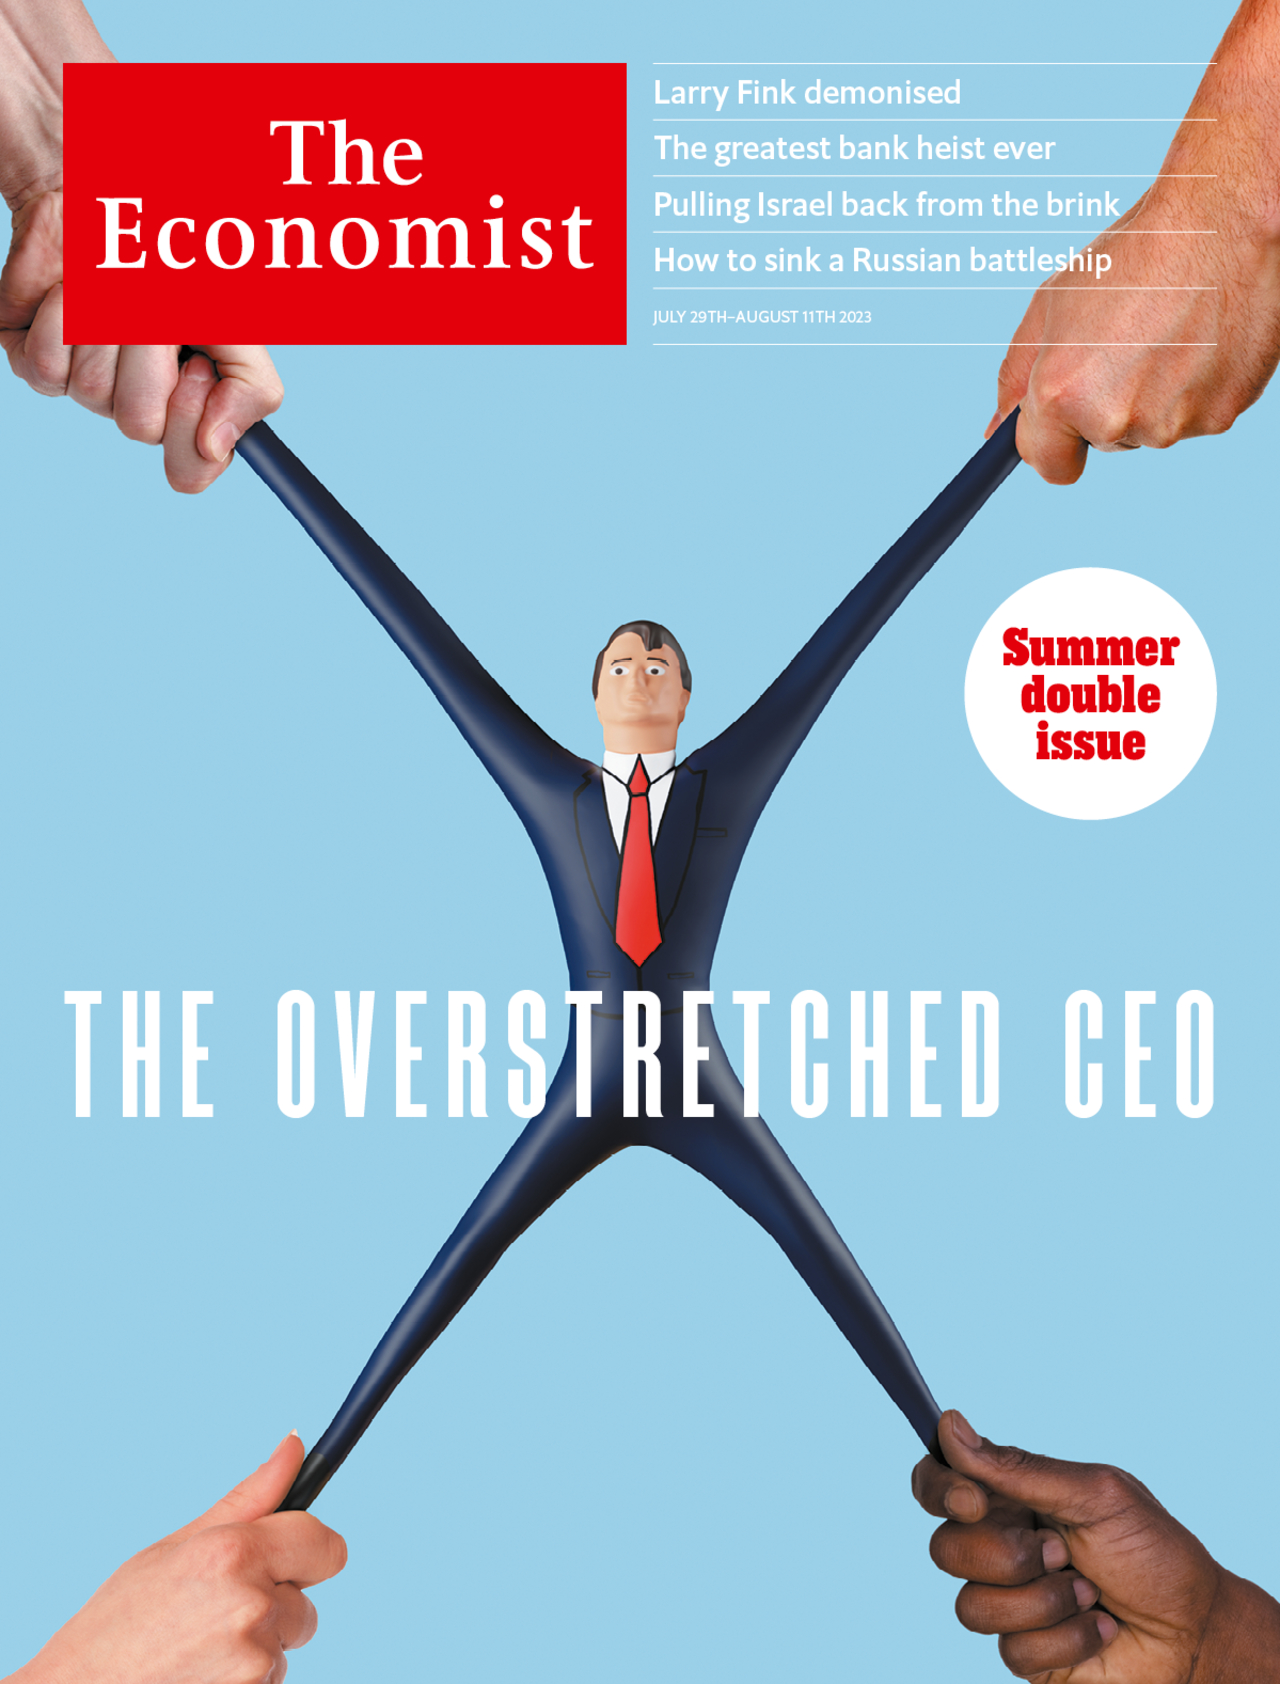 The overstretched CEO